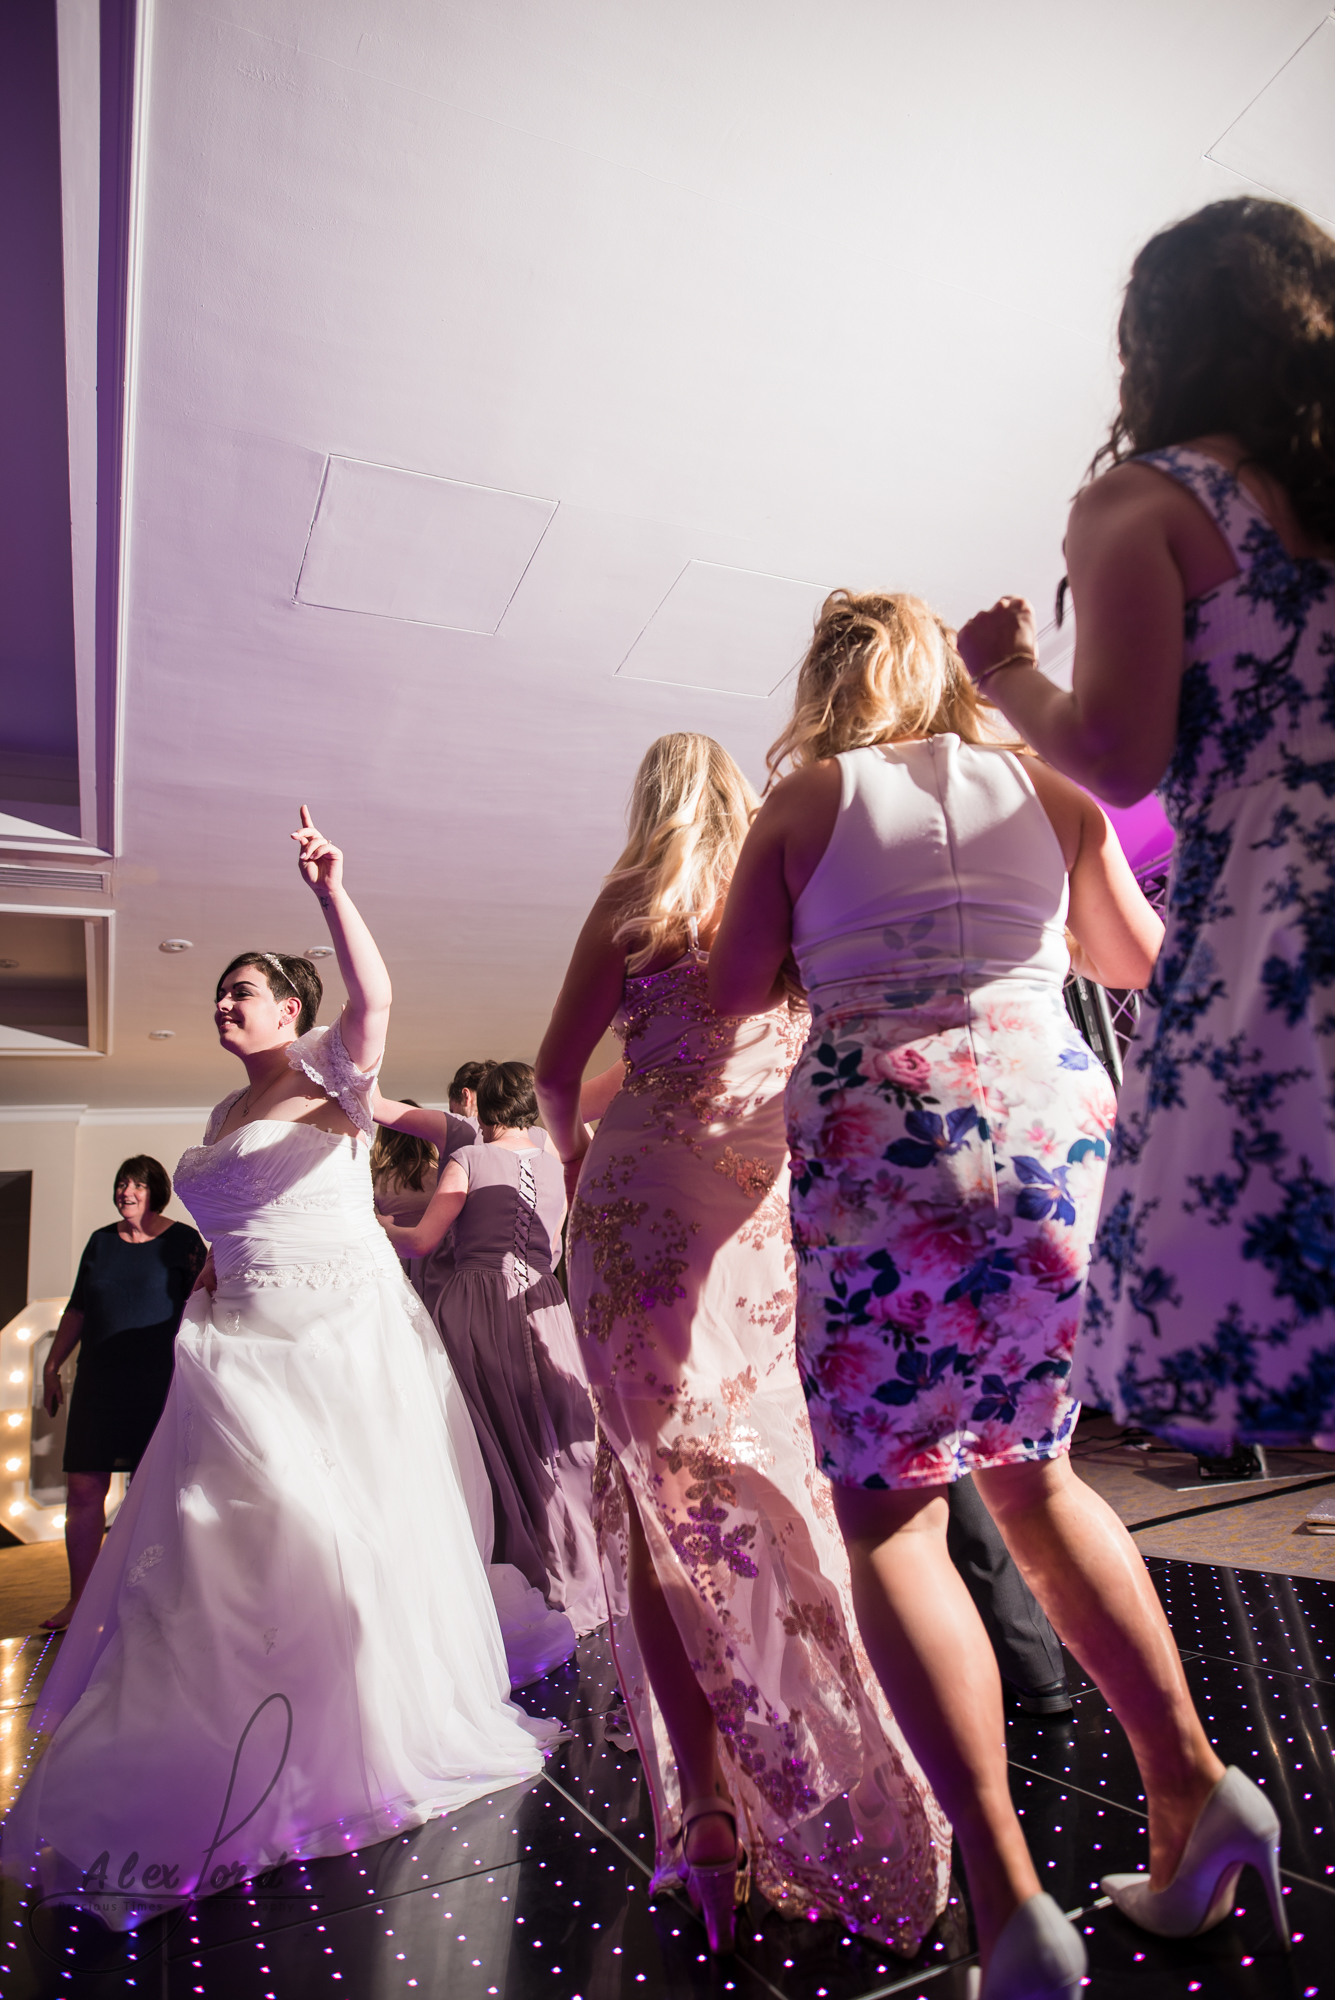 the bride leads other wedding guests as they dance around the dance floor